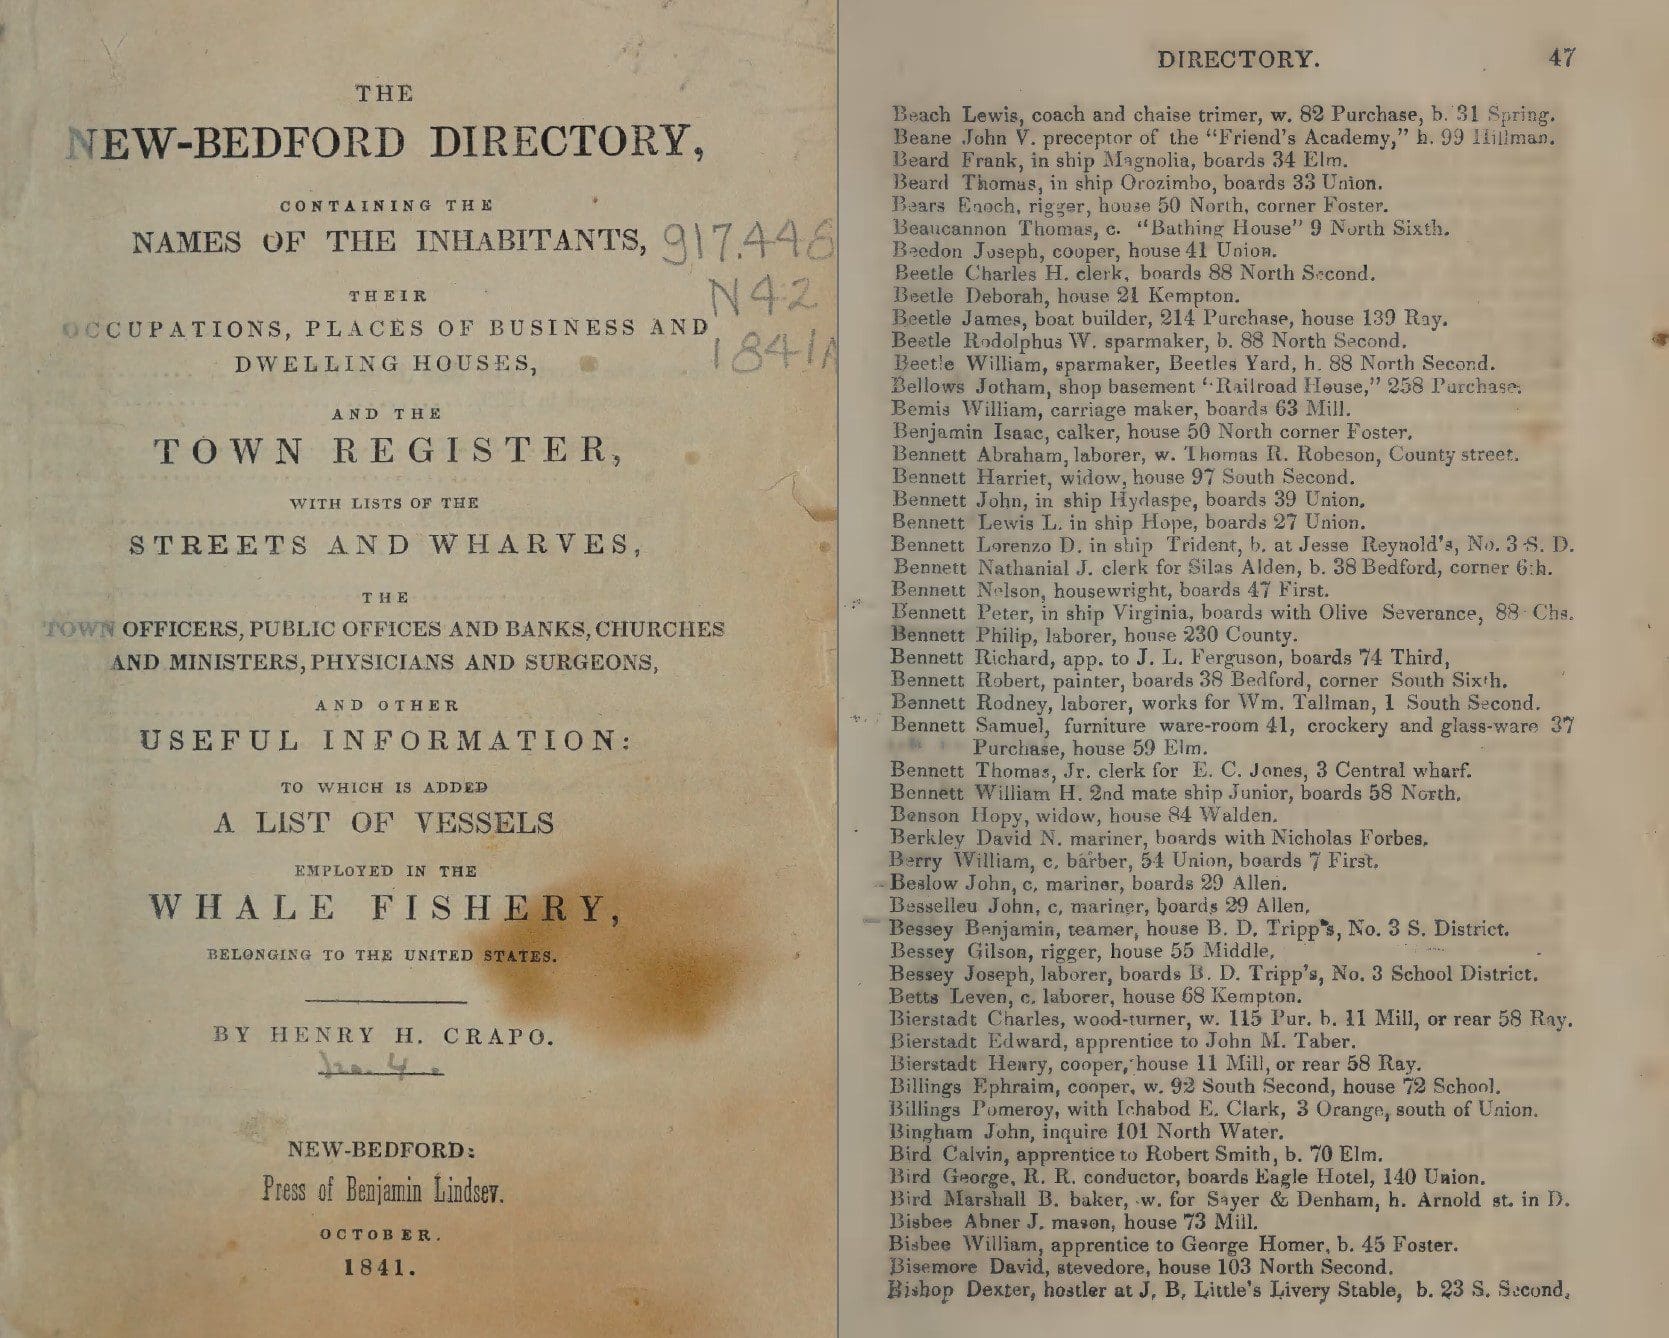 Charles, Edward, and Henry Bierstadt are listed in The New Bedford City Directory, 1941